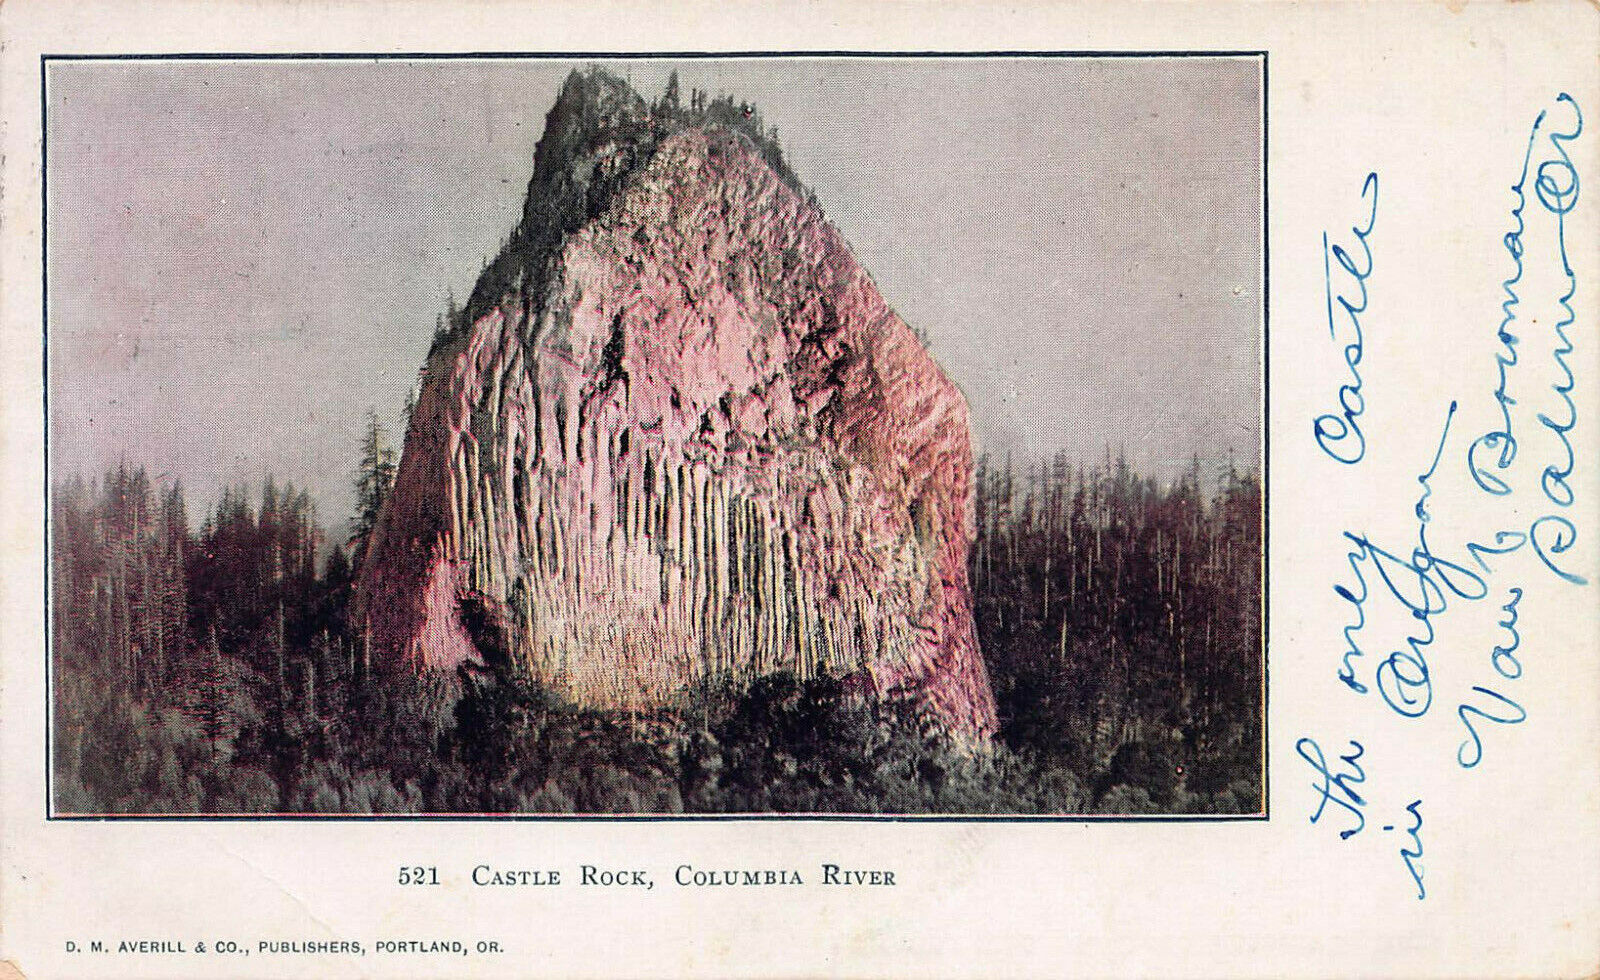 Castle Rock, Columbia River, Washington State, Early Postcard, Used in 1906